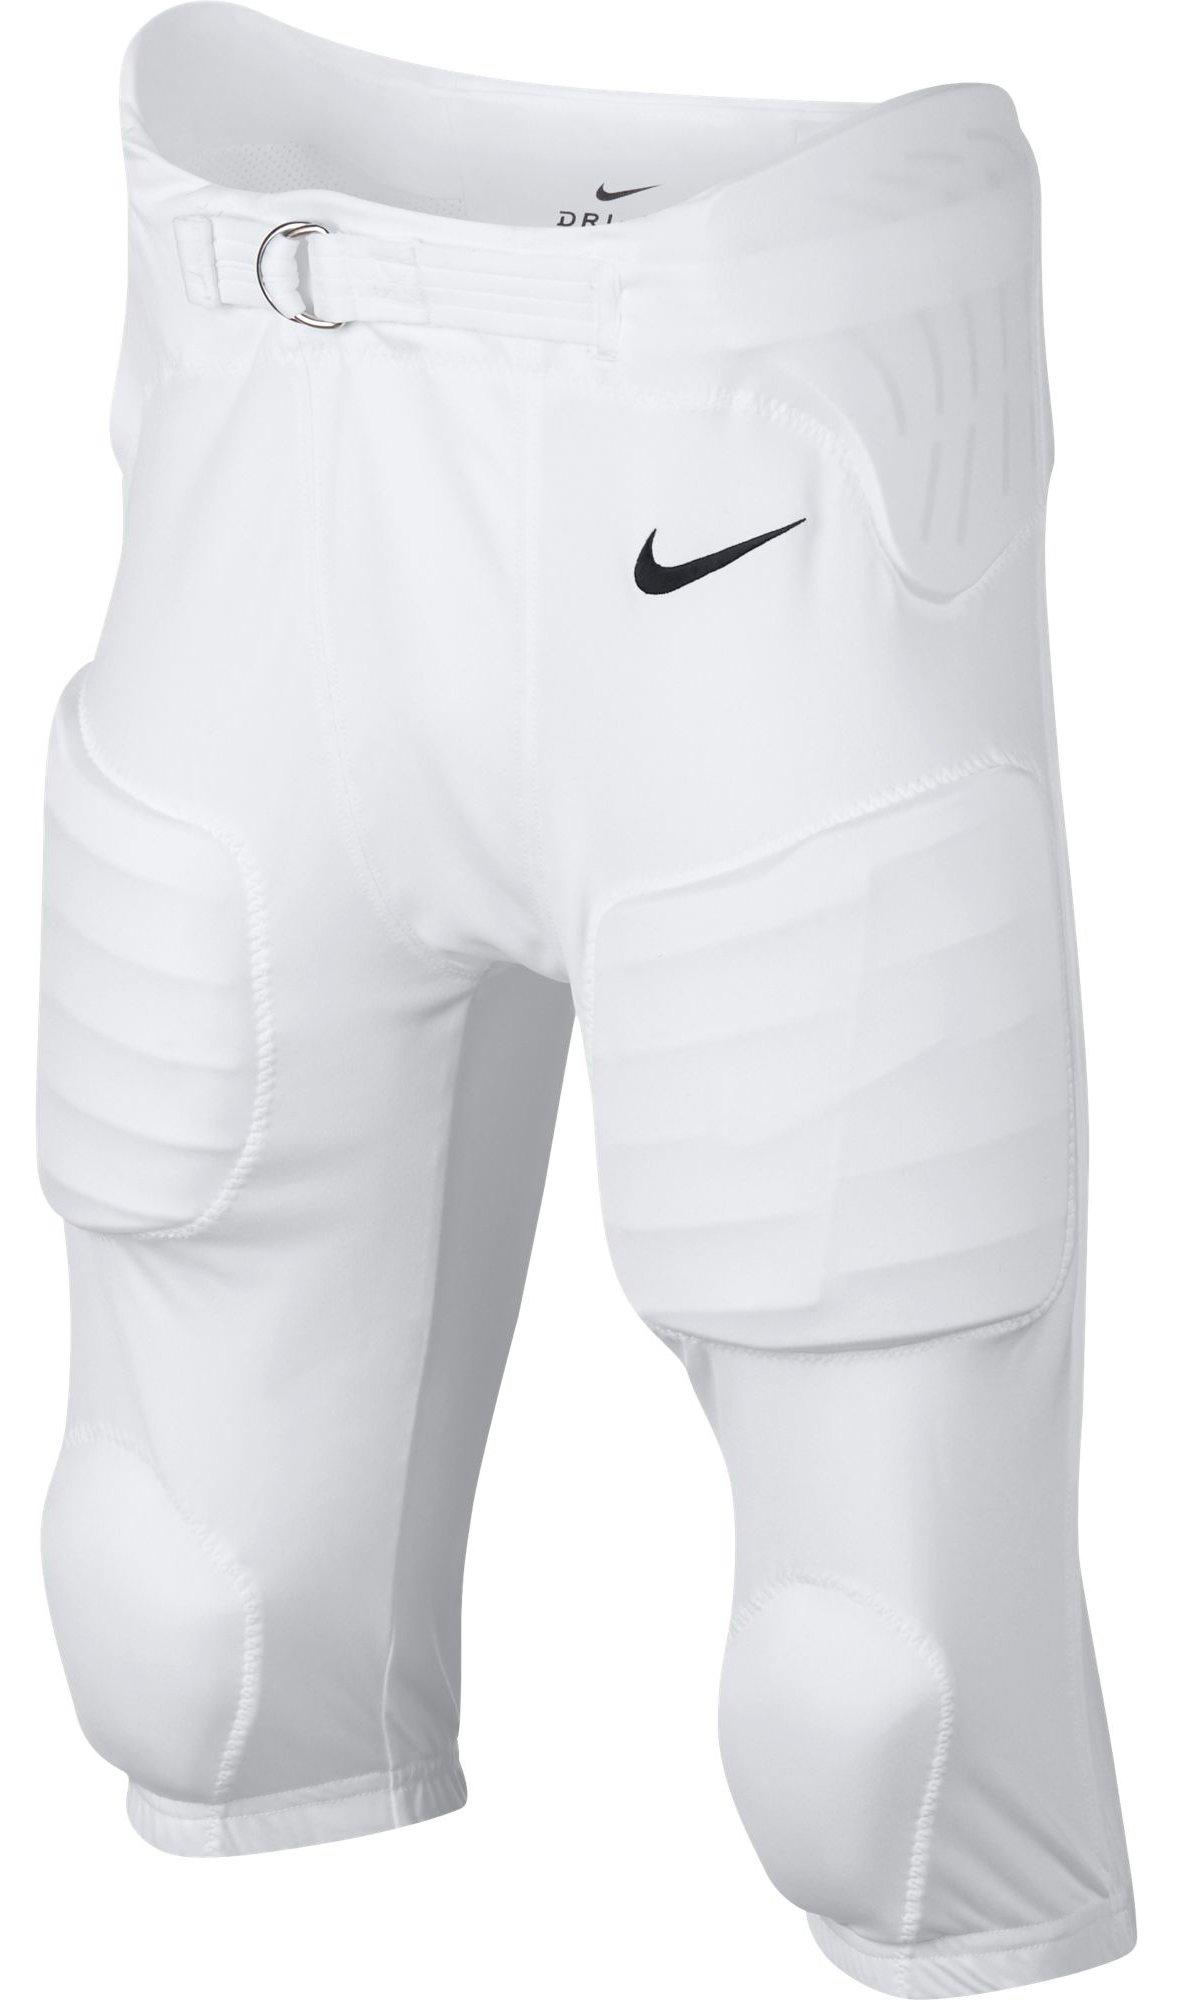 Under Armour Youth Integrated Football Pant - White - Hibbett